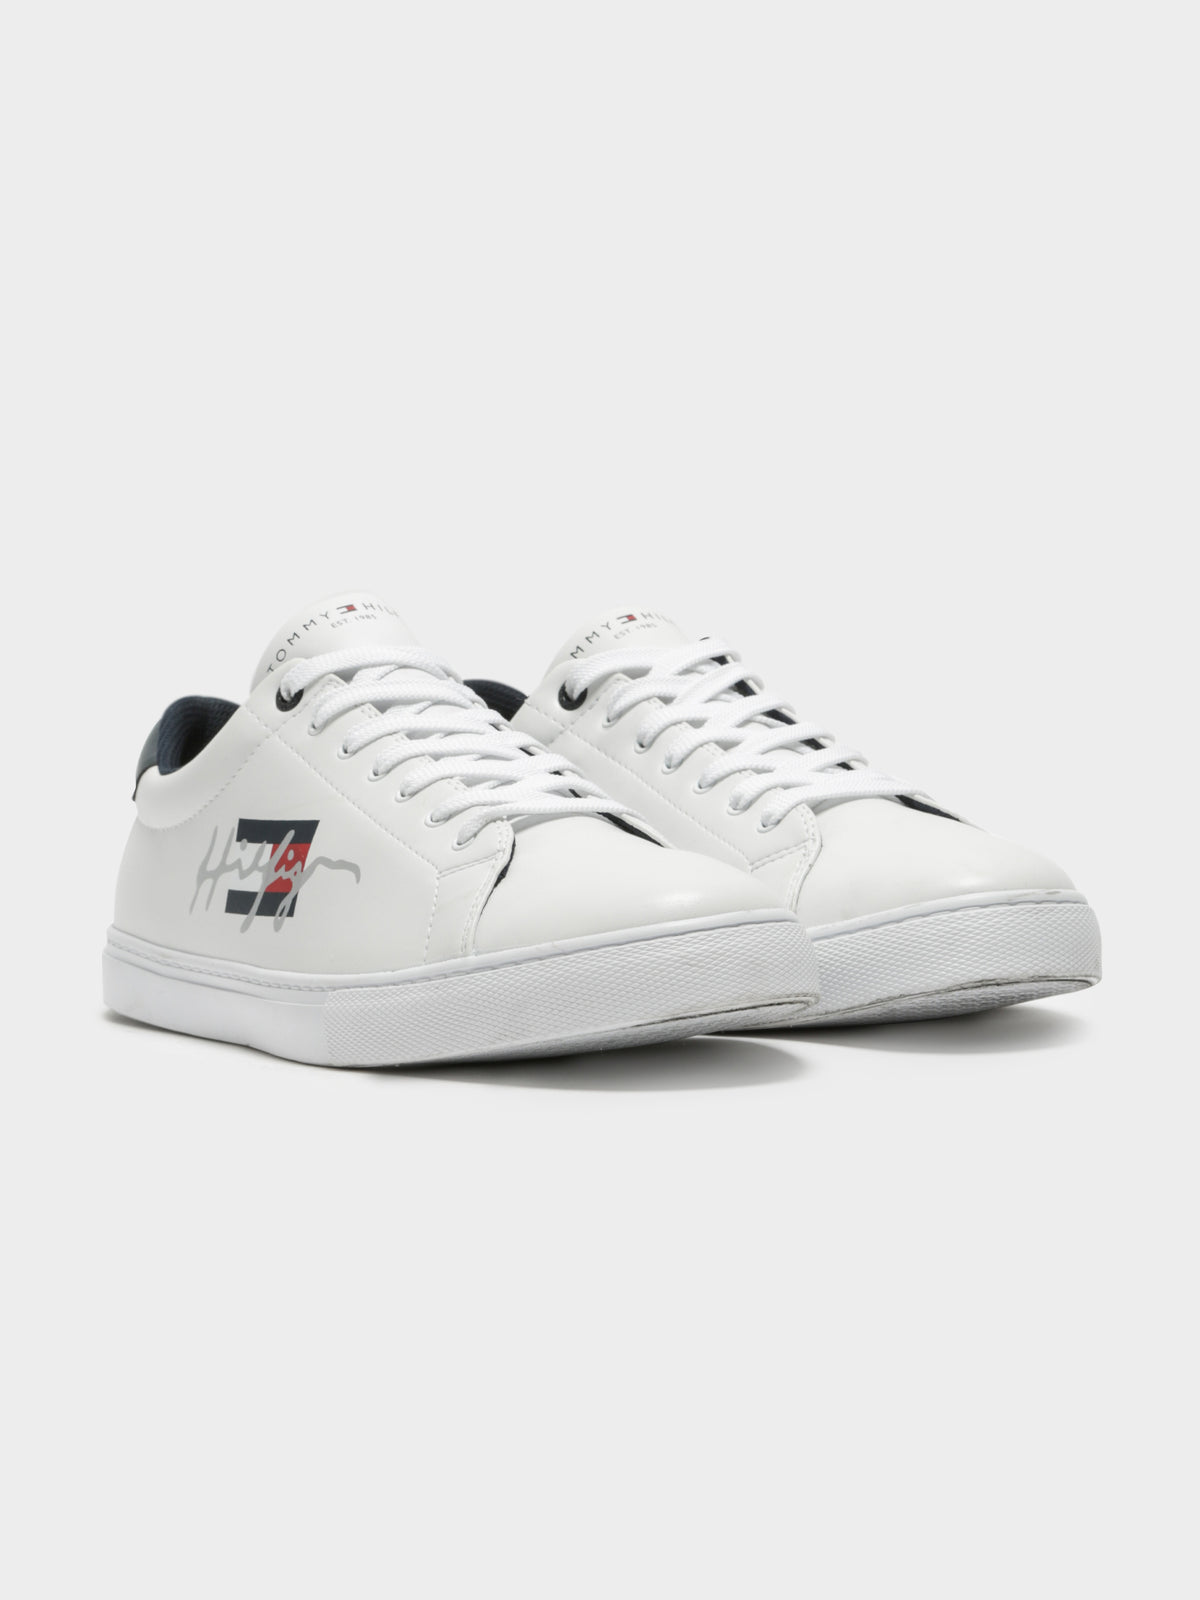 Mens Novelty Sneakers in White